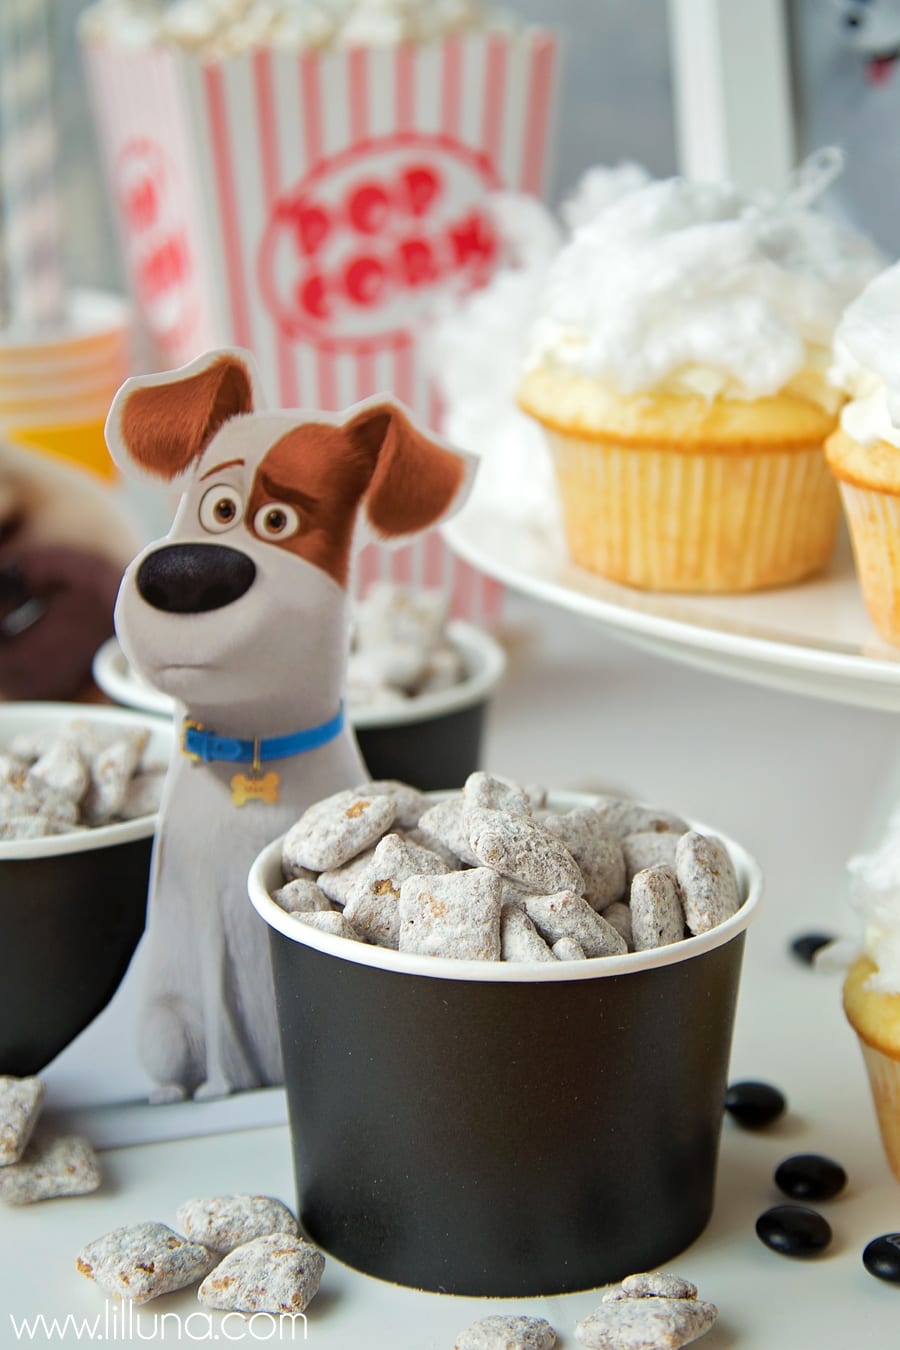 The Secret Life of Pets Movie Night idea with Gidget cupcakes, Puppy Chow and Paw Print Cupcakes.